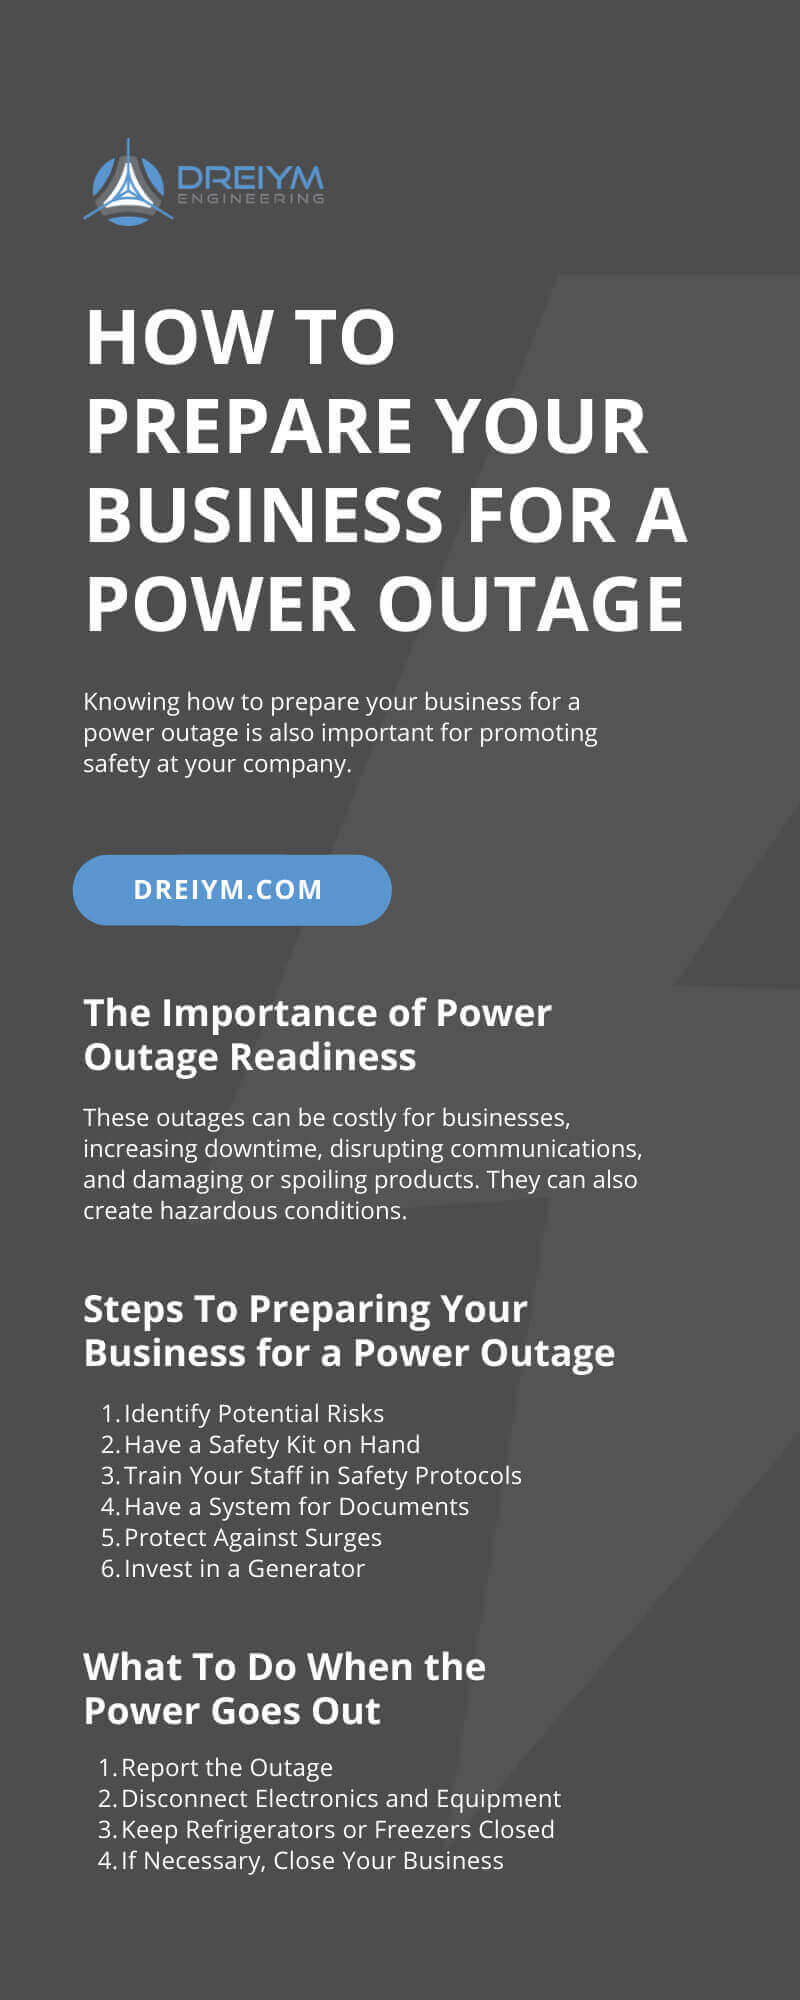 How To Prepare Your Business for a Power Outage